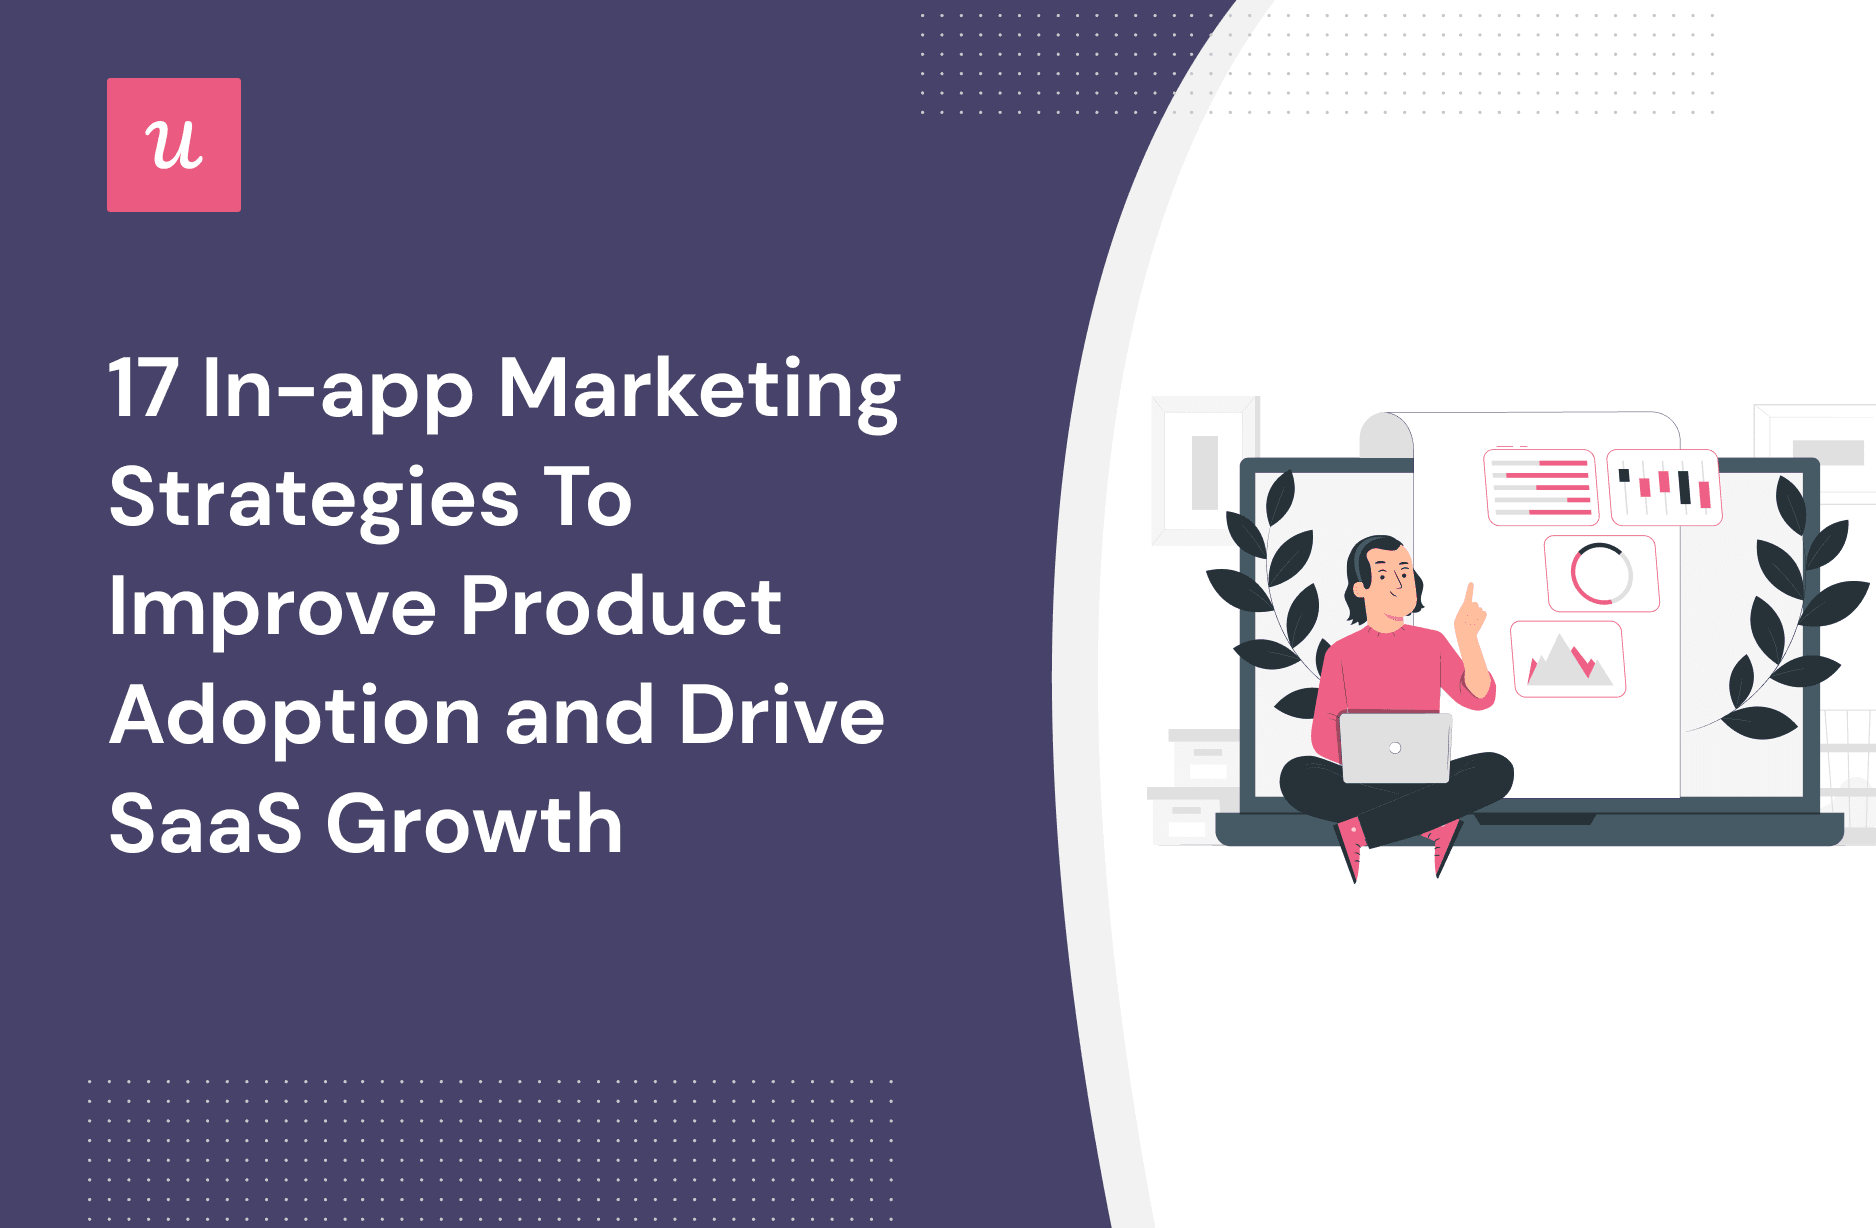 17 In-app Marketing Strategies To Improve Product Adoption and Drive SaaS Growth cover